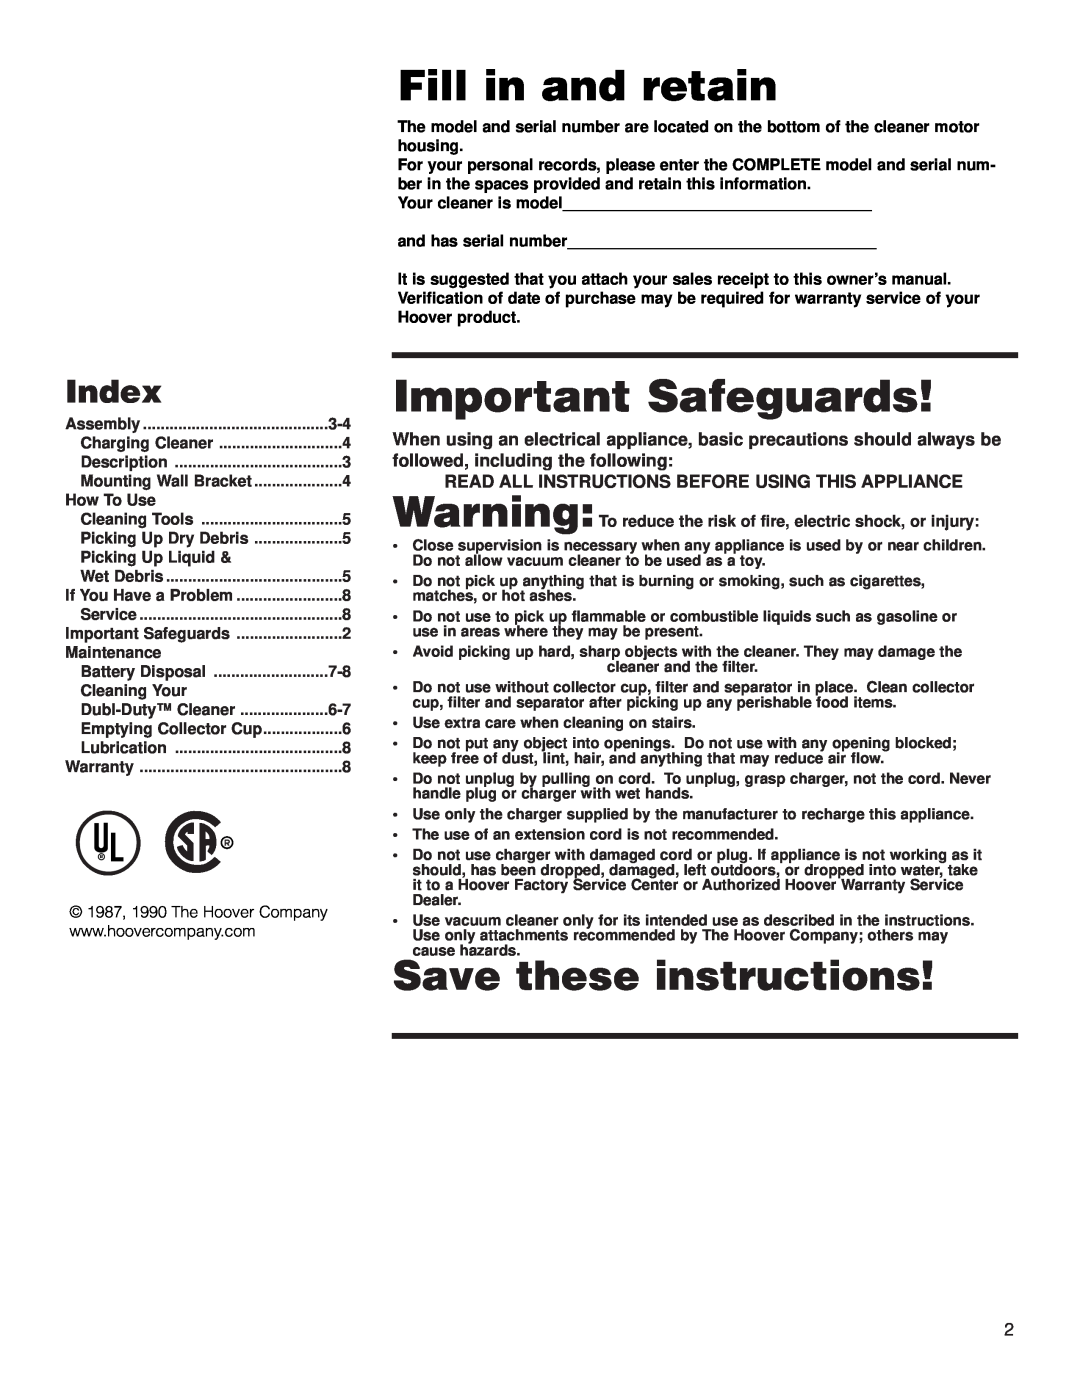 Hoover Dubl-Duty owner manual Index, Important Safeguards, Fill in and retain, Save these instructions 